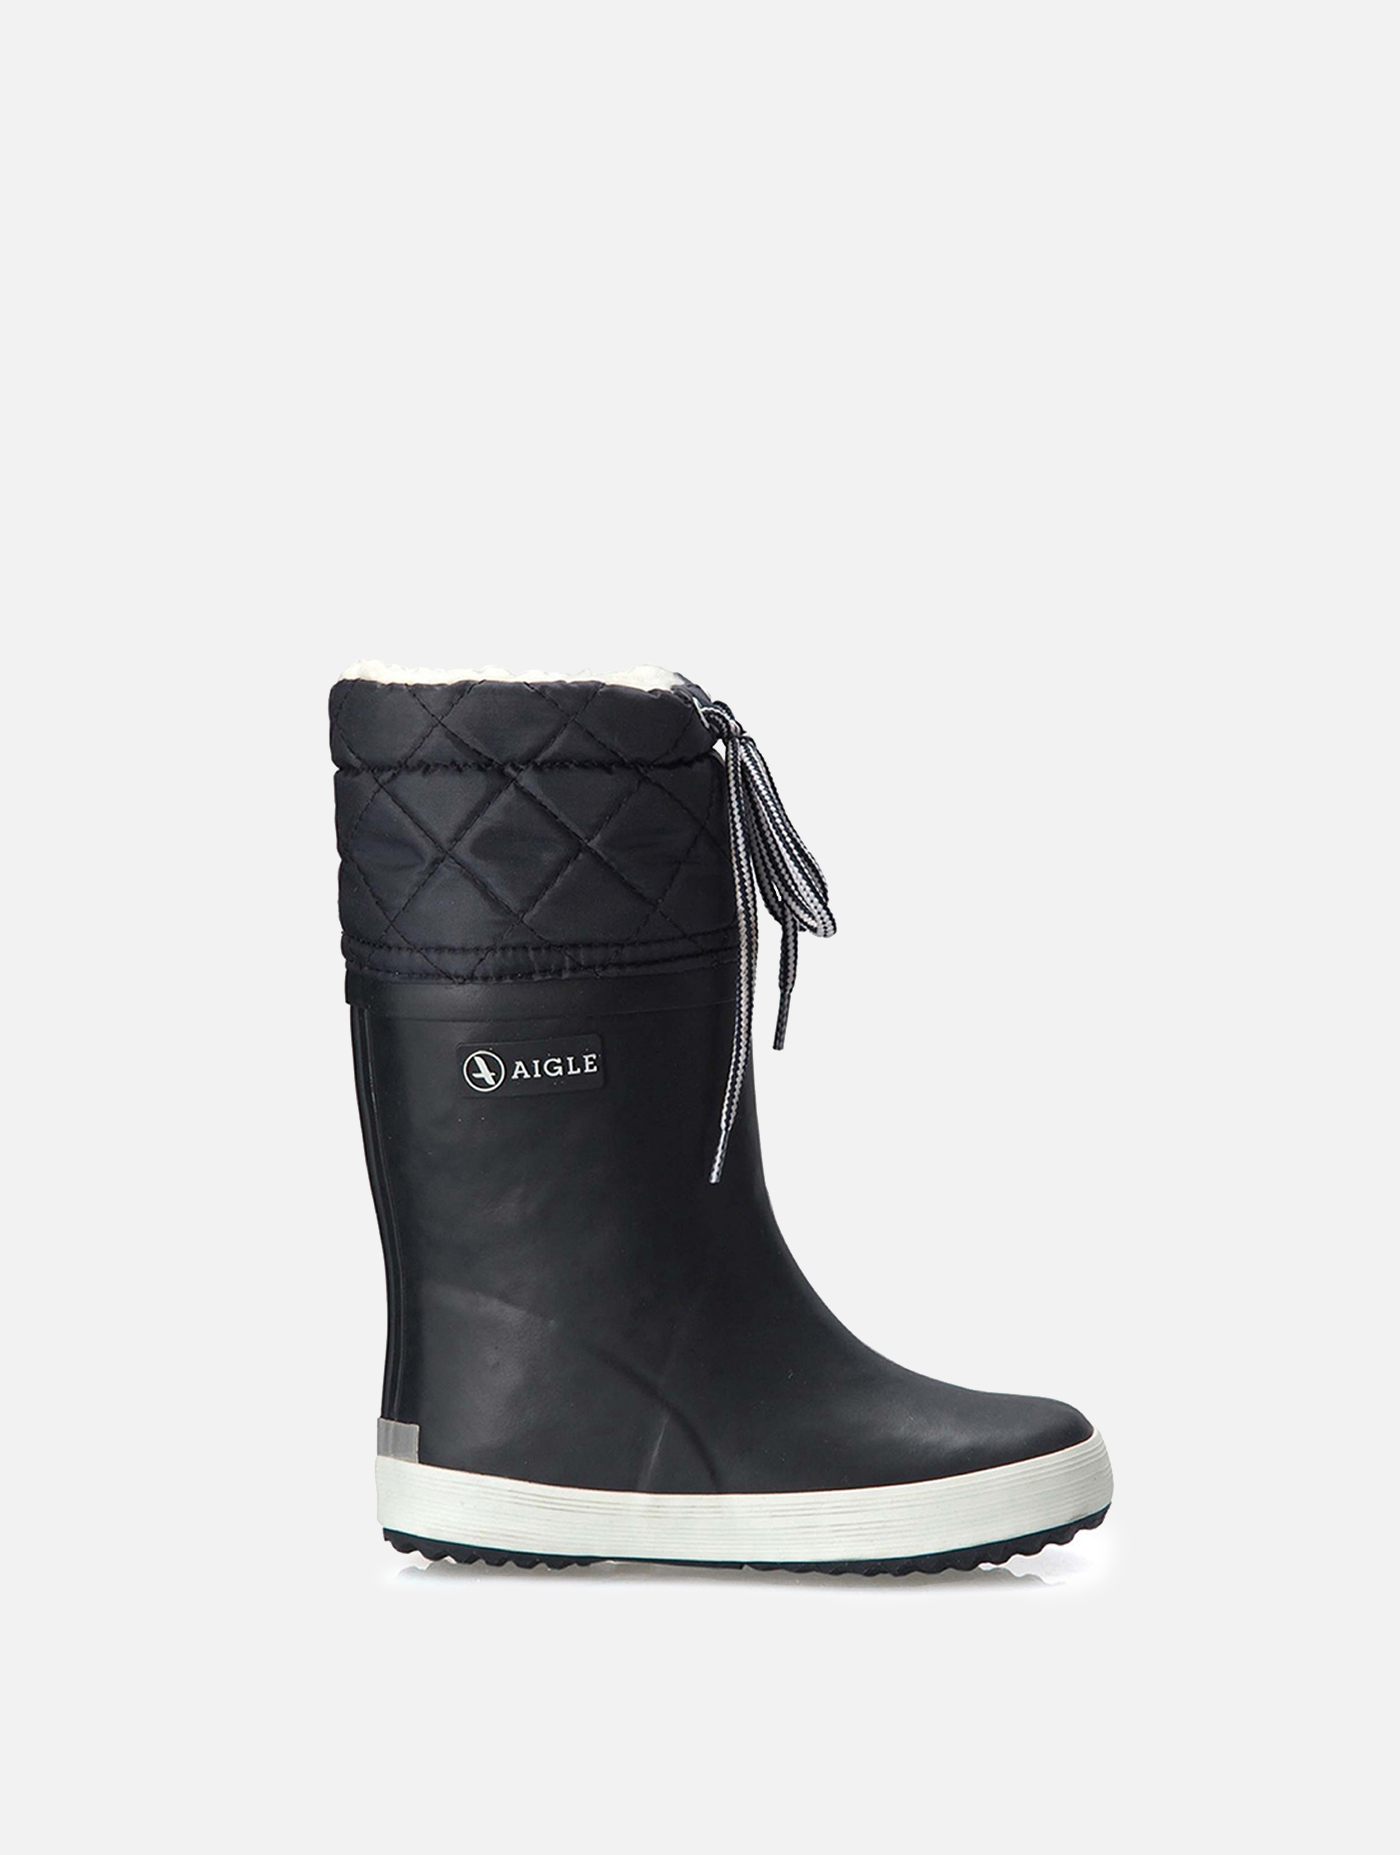 Grader celsius Forkæl dig sang Aigle - The fur-lined children's boot, ideal for cold weather Marine/blanc  - Giboulee | AIGLE